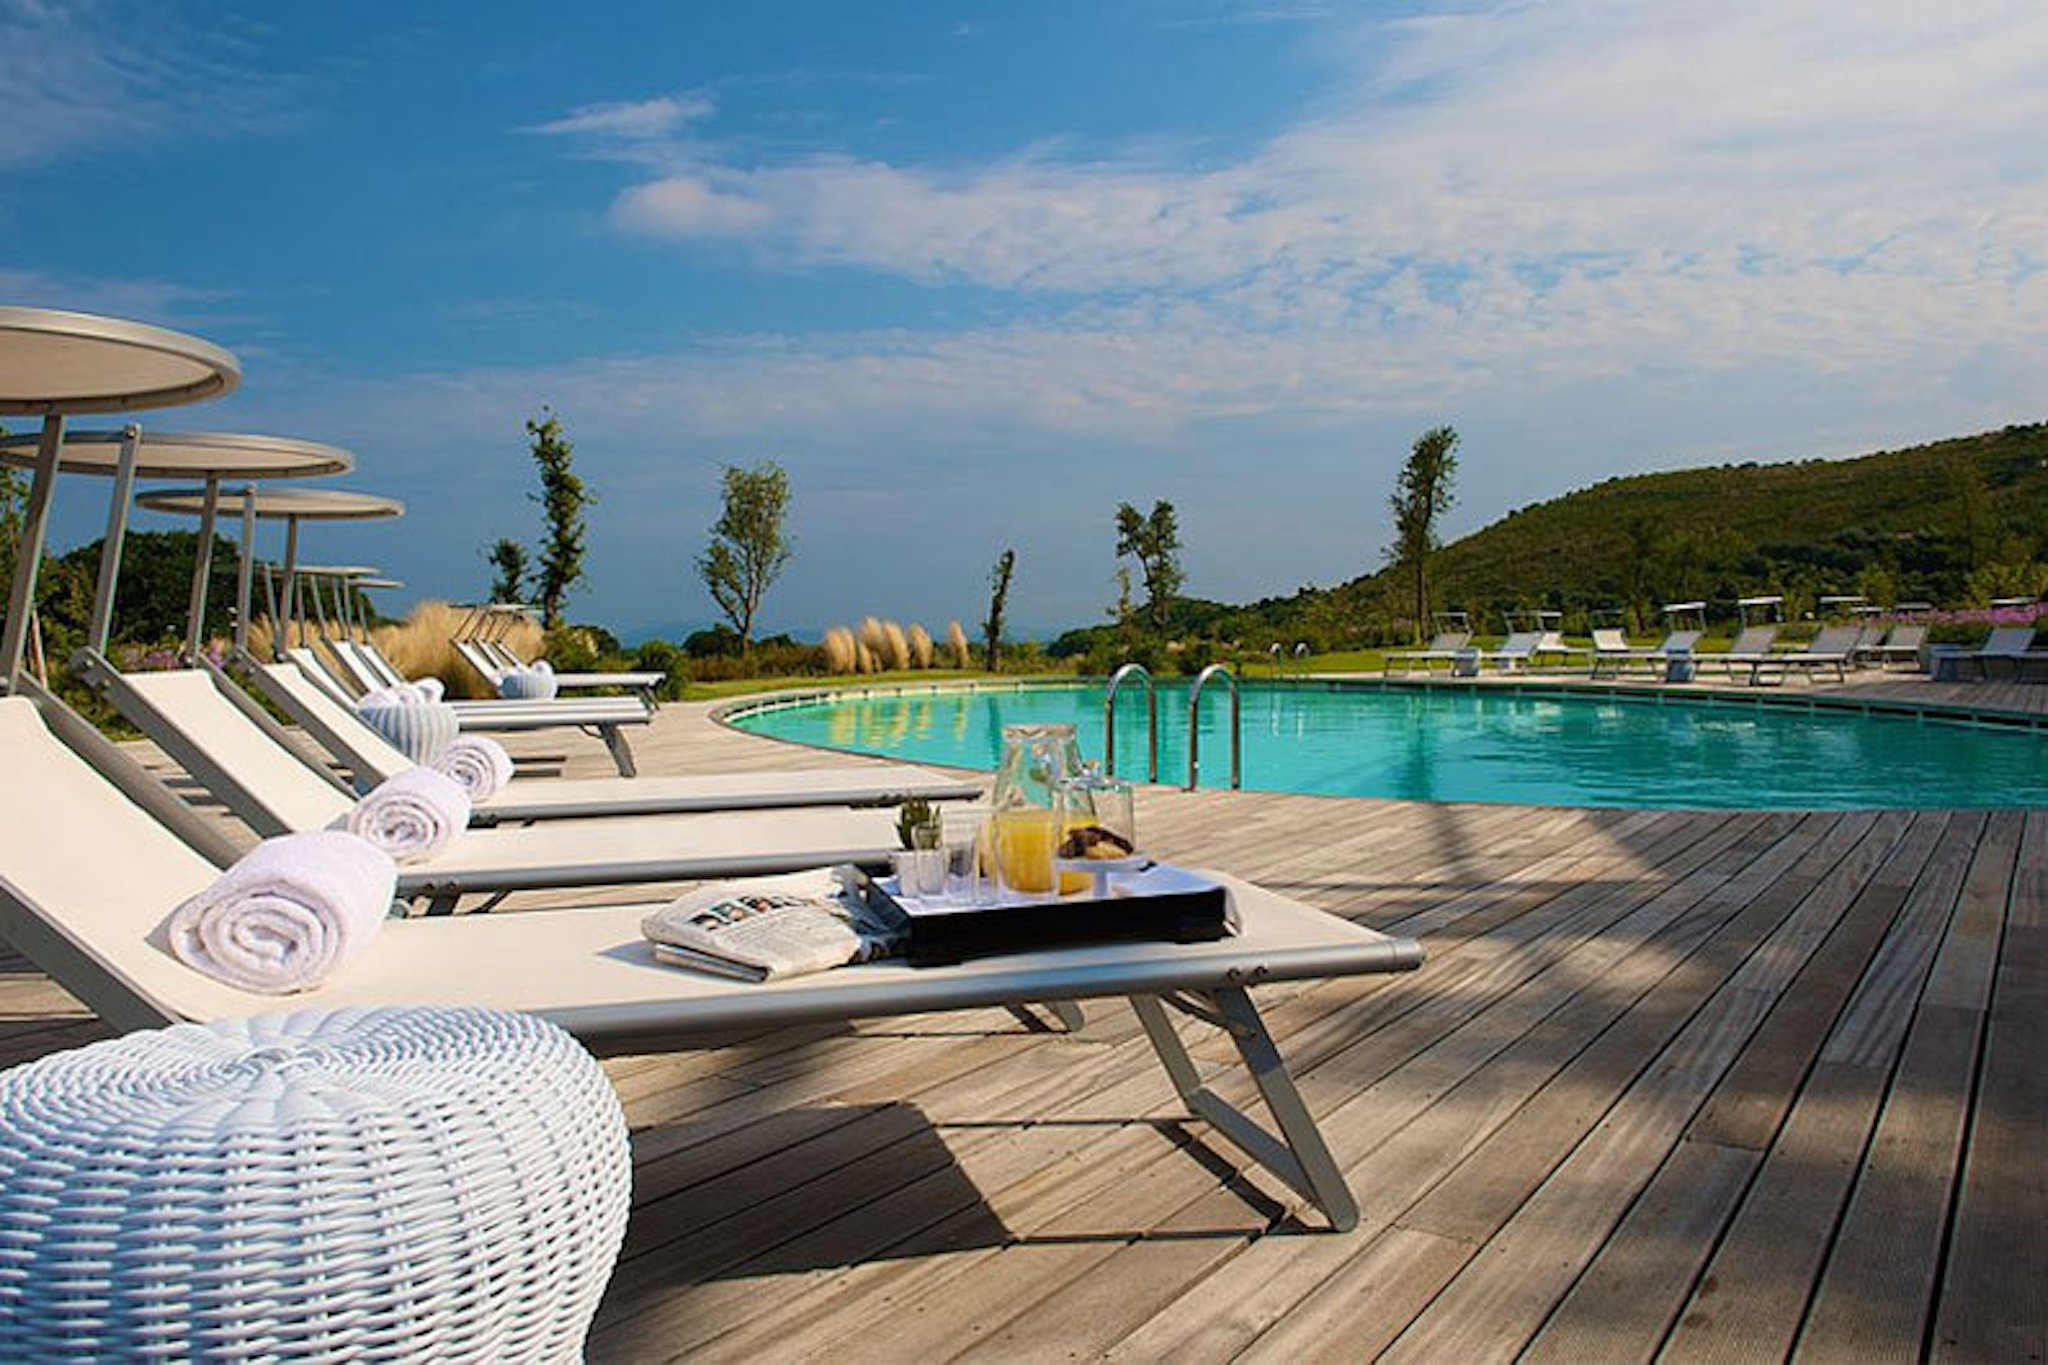 Argentario Tuscan Golf Luxury Spa for 2 Offer